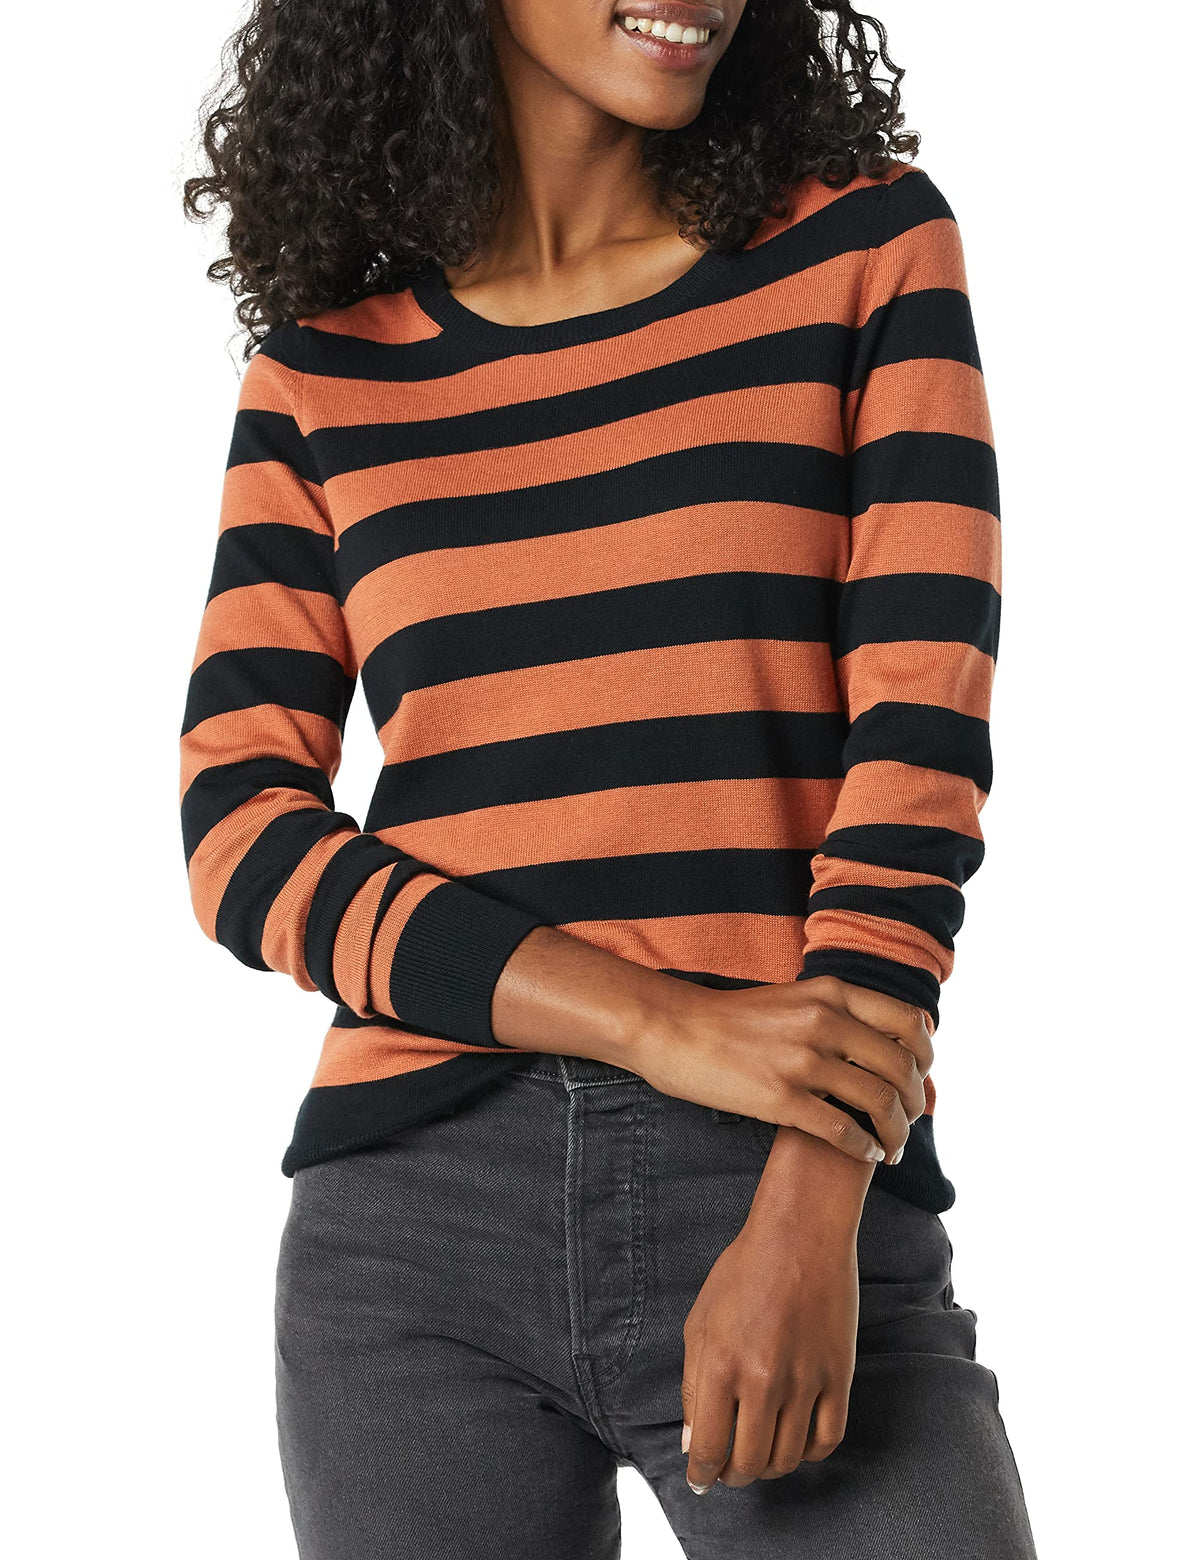 Amazon Essentials Women's Long-Sleeve Lightweight Crewneck Jumper (Available in Plus Size), Black Caramel Rugby Stripe, L